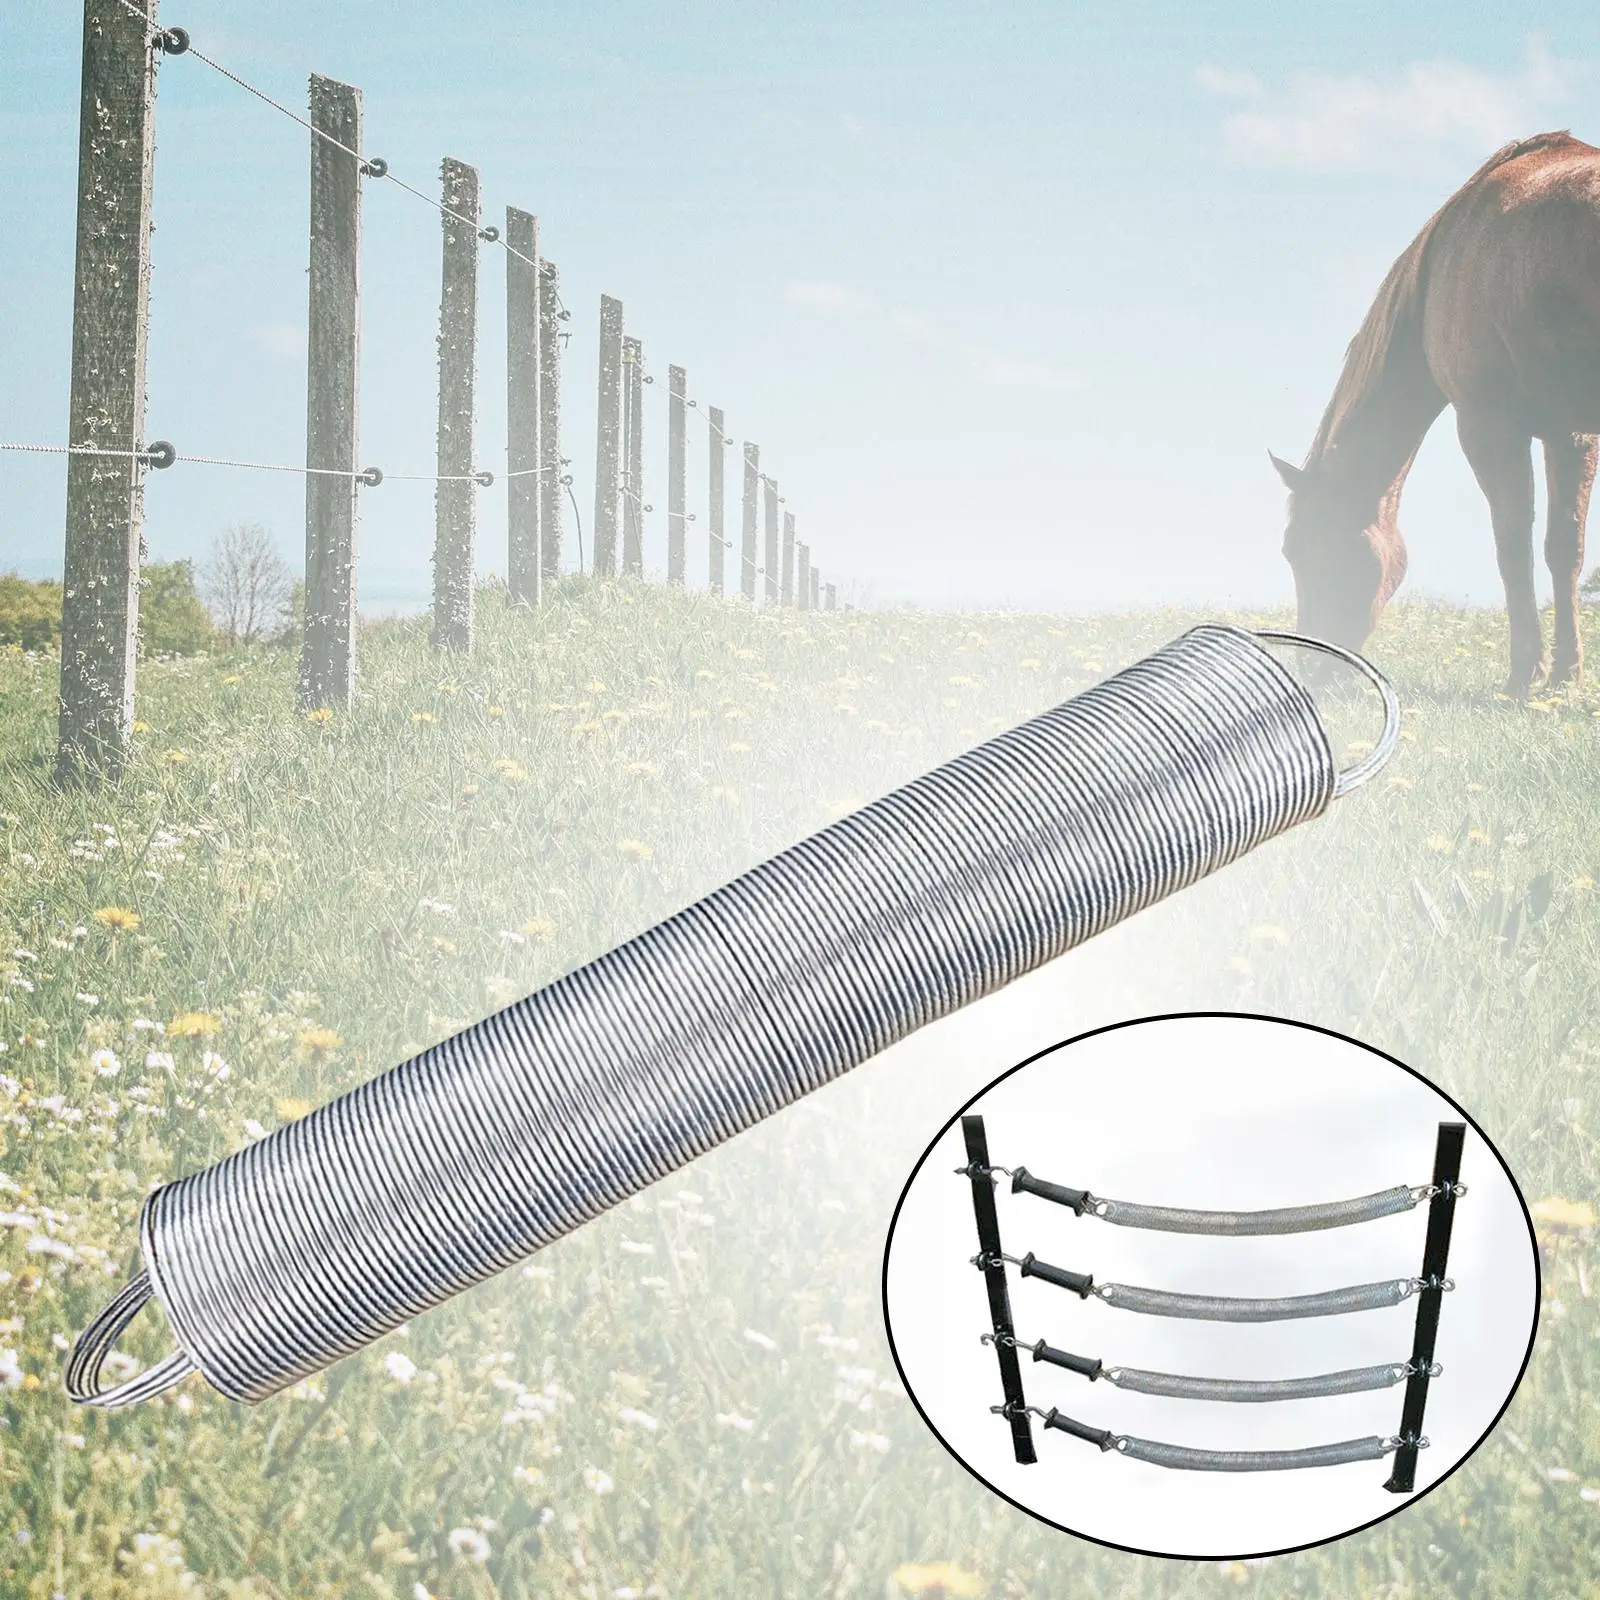 Retractable Spring Gate Simple Installation Livestock Fence Handle Tension Spring for Preventing Animals Intruding Fitments